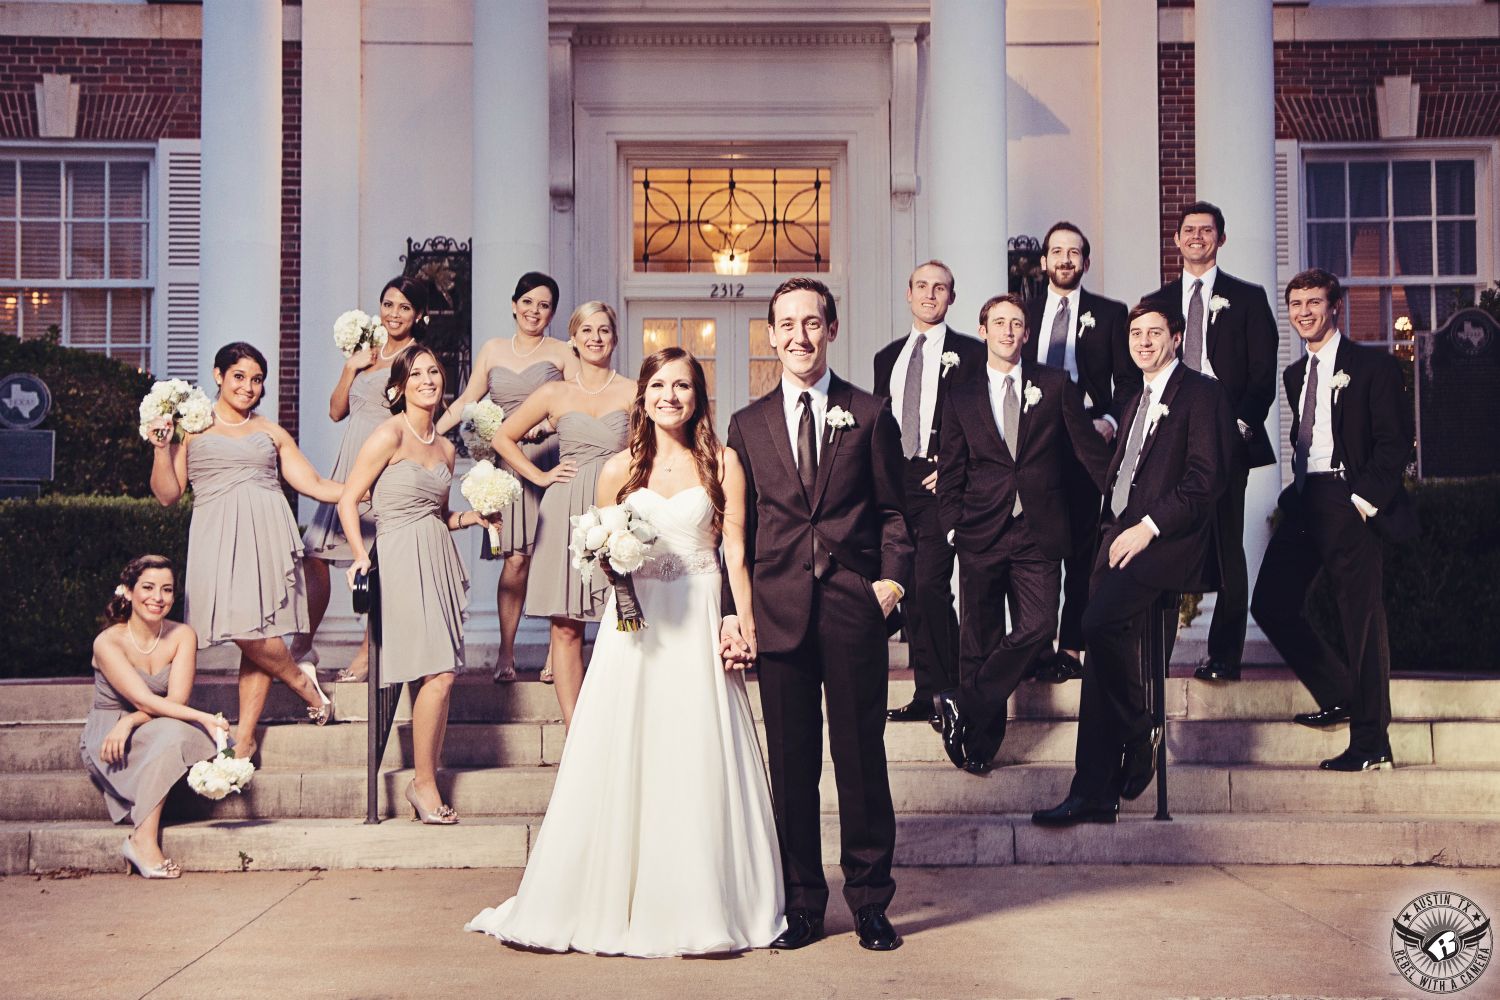 Wedding picture of entire bridal party with bridesmaids in gray dresses and groomsmen in black suits with black ties on the steps of the Texas Federation of Women's Clubs Mansion Headquarters Austin wedding venue in downtown Austin.